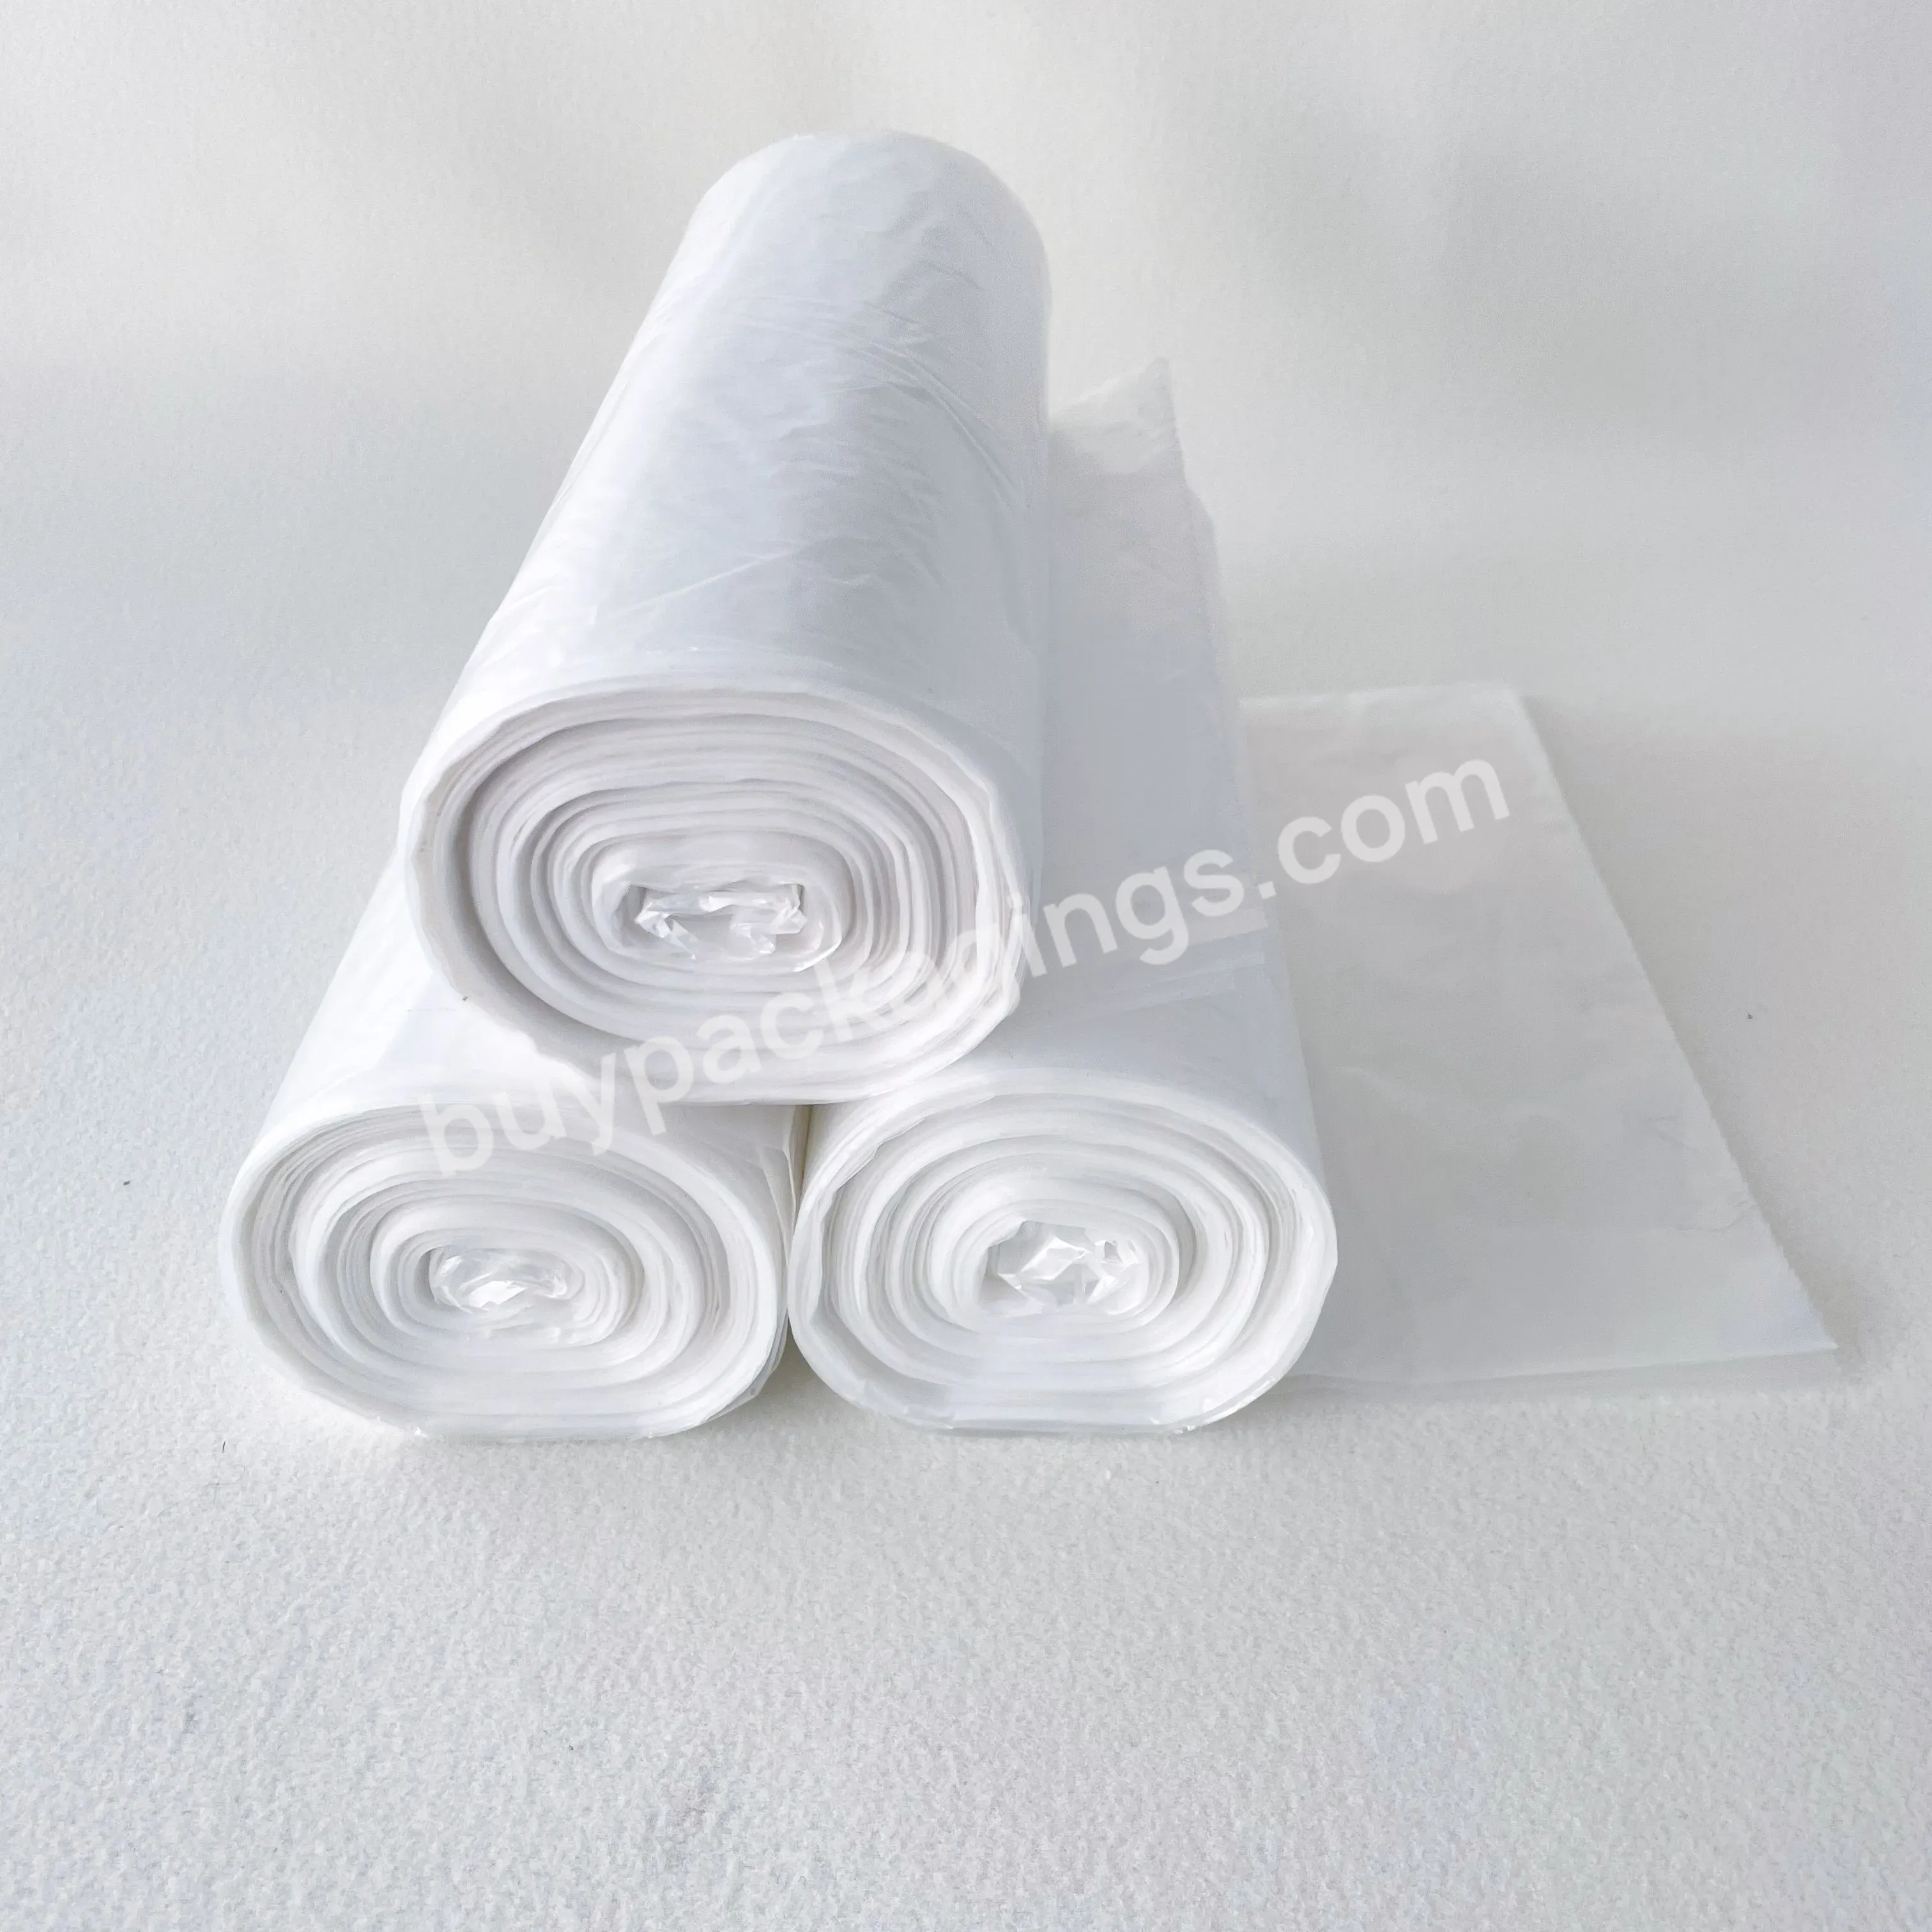 36'' X 60'' 55 Gallons Contractor Clear Garbage Bags,Trash Bags Roll Wholesale - Buy Trash Bags Roll Wholesale,Garbage Bag,Recycling Plastic Garbage Trash Bag.